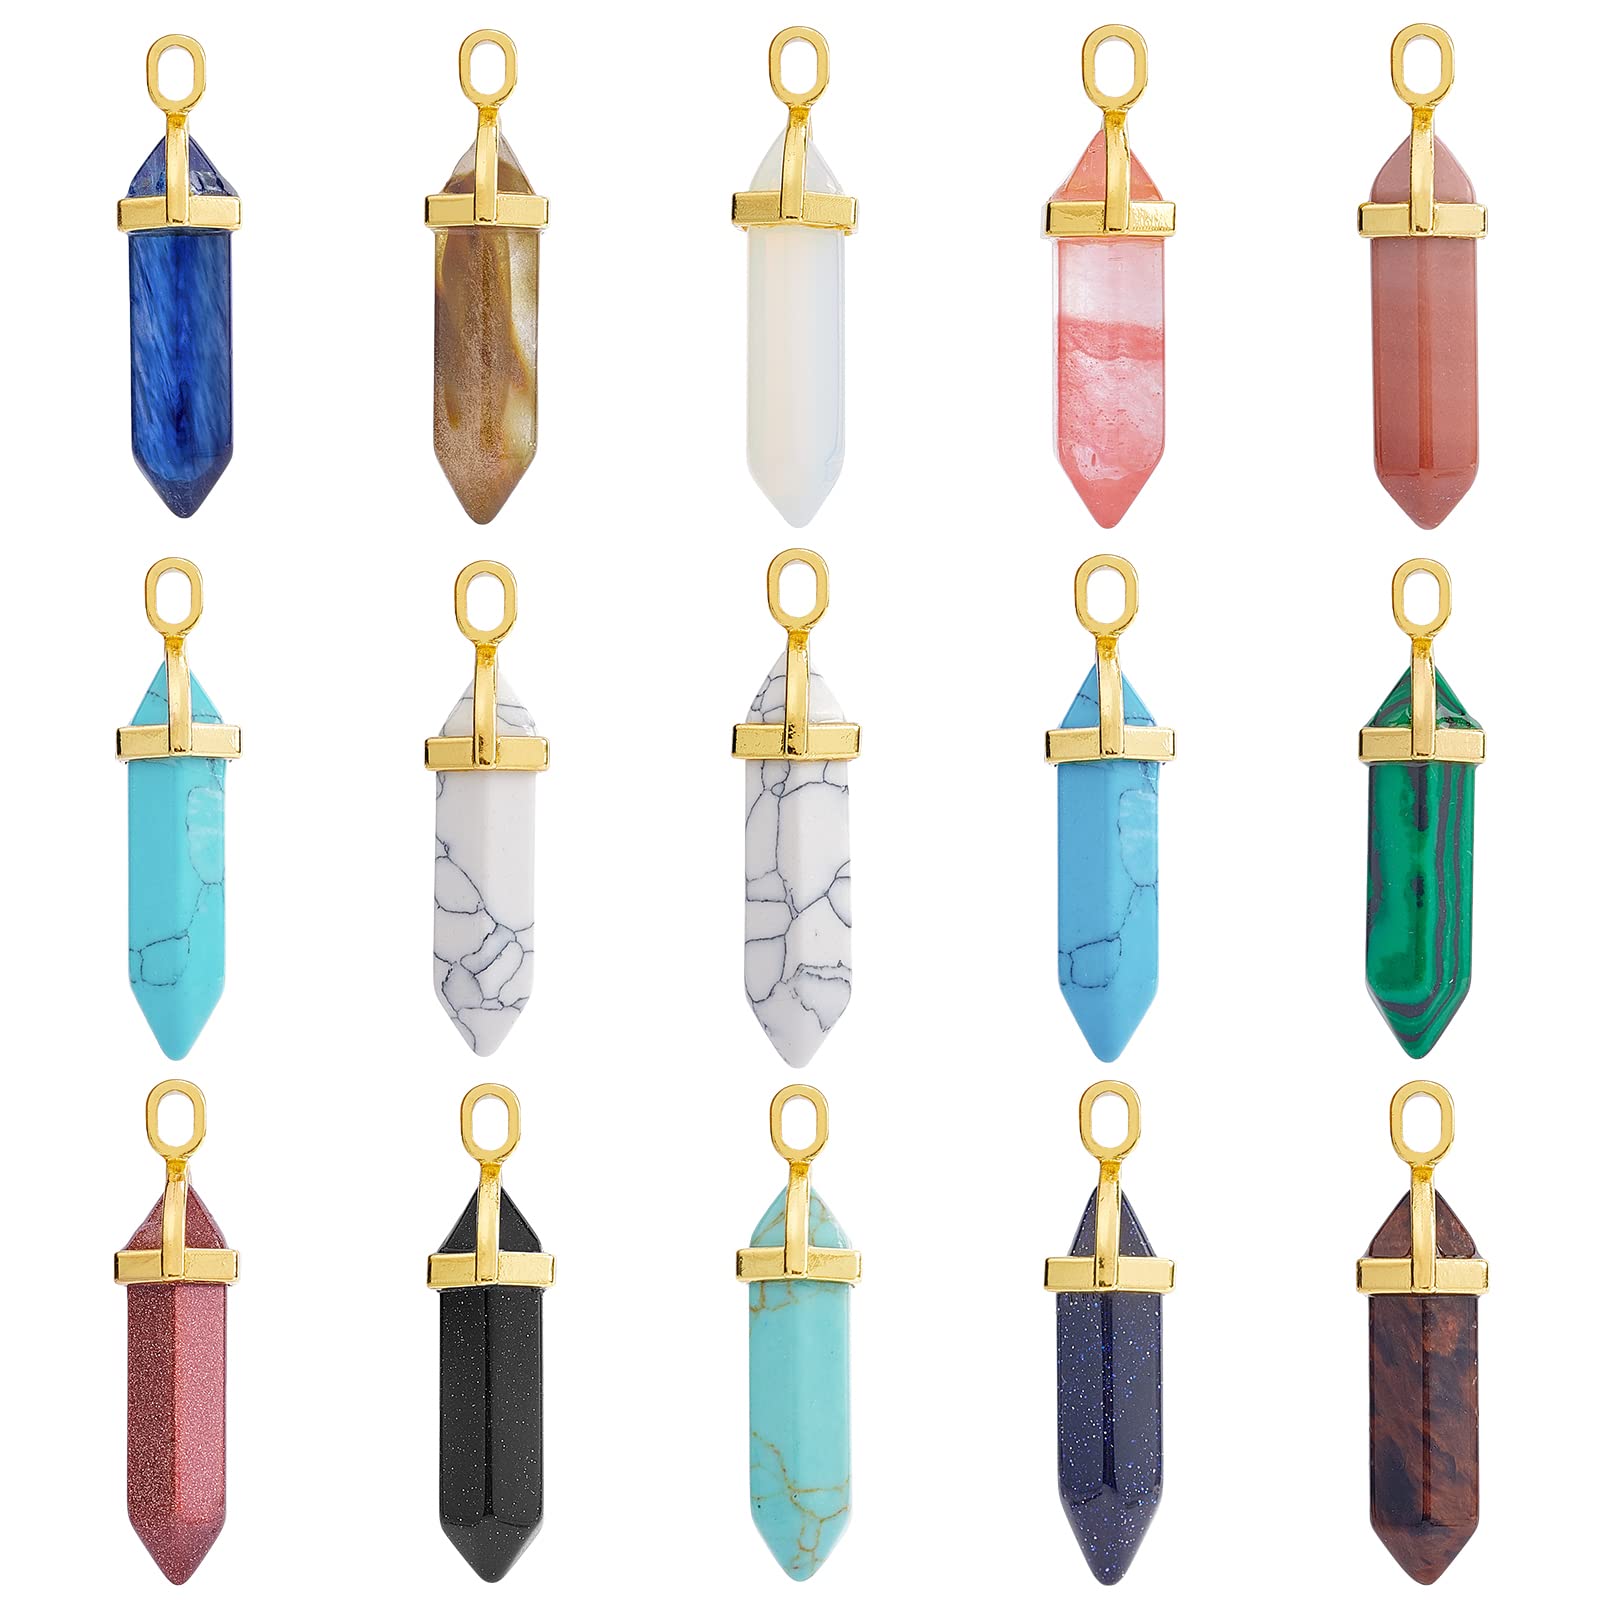 Pendants Nbeads Hexagonal Crystal Quartz Stone Pointed Gemstone Charms For Necklaces Jewelry Making Drop Delivery Amh3N